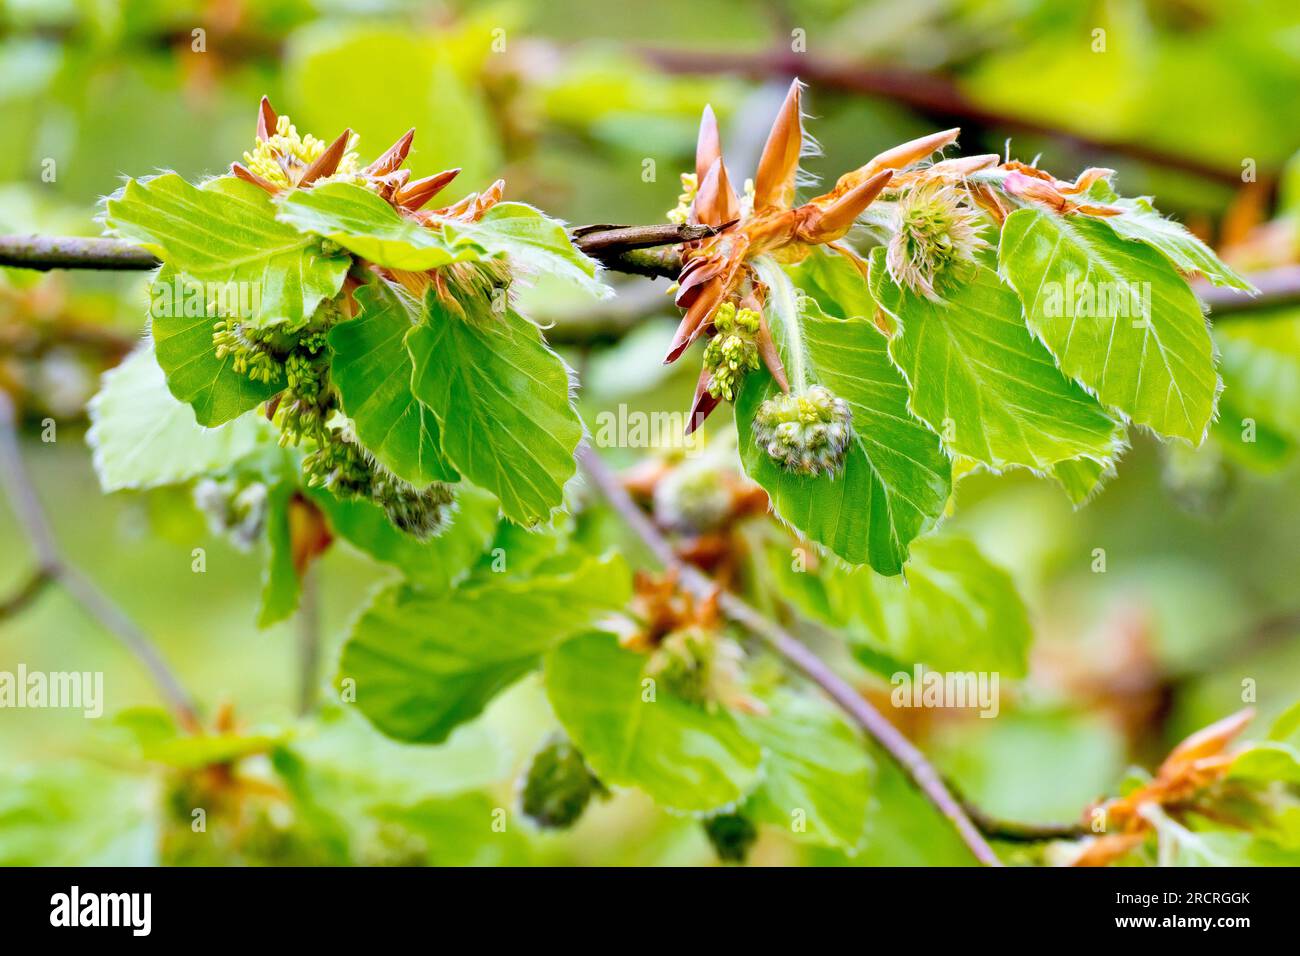 Beech (fagus sylvatica), close up showing the male and female flowers of the tree growing amongst the new leaves put out in the spring. Stock Photo